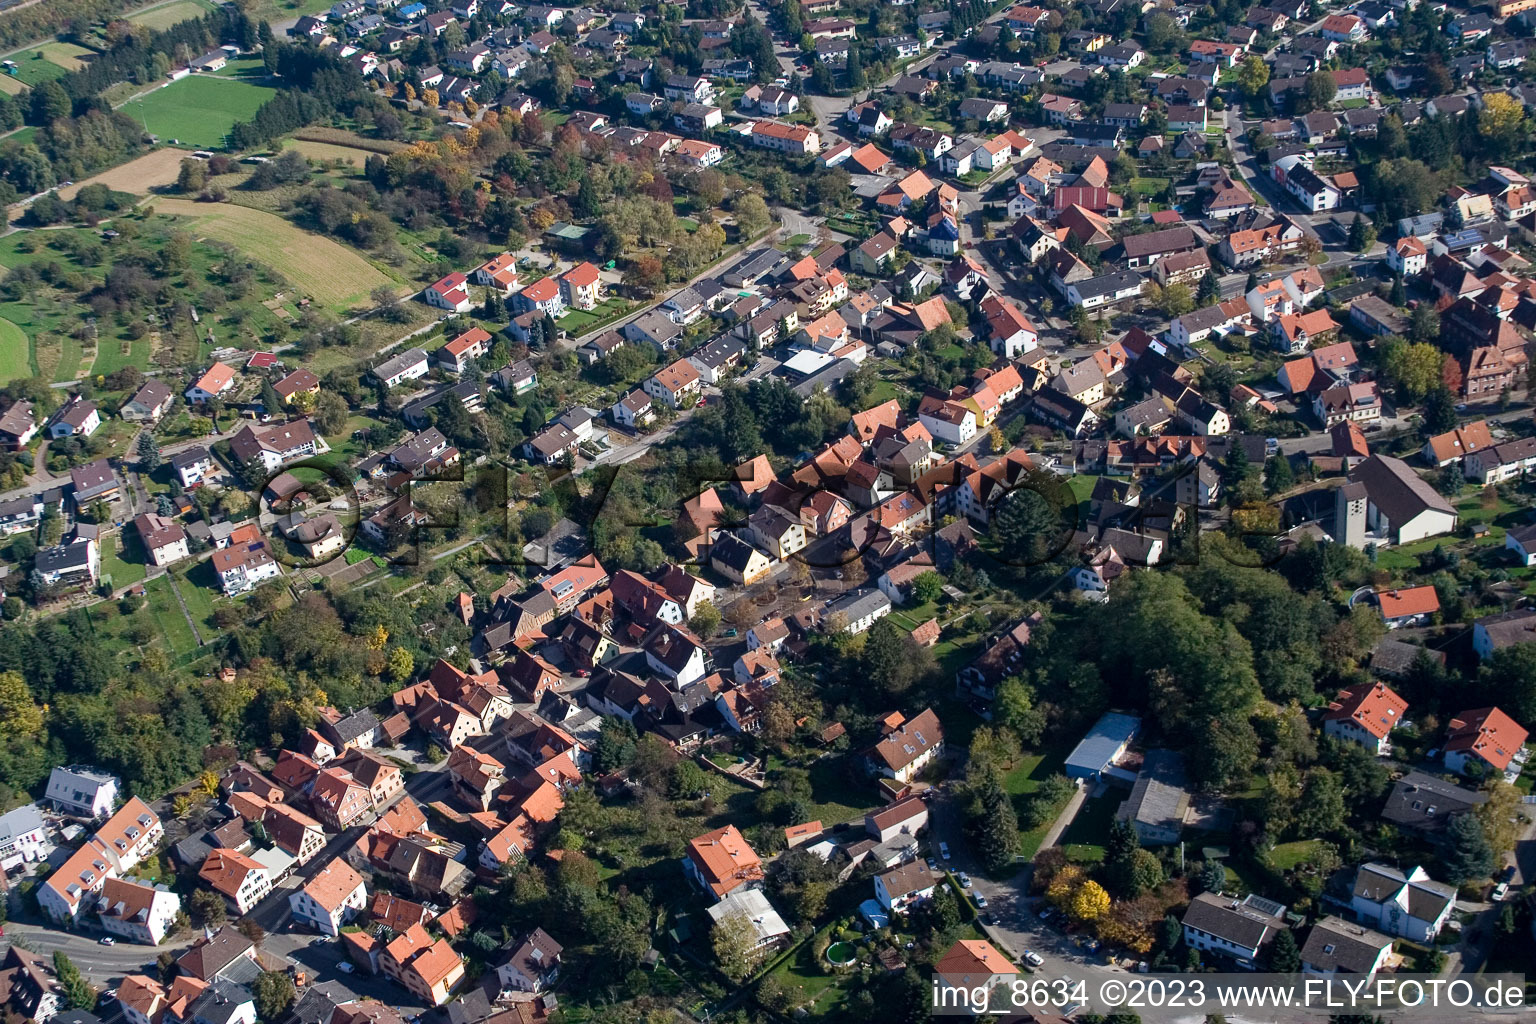 District Grünwettersbach in Karlsruhe in the state Baden-Wuerttemberg, Germany from the plane